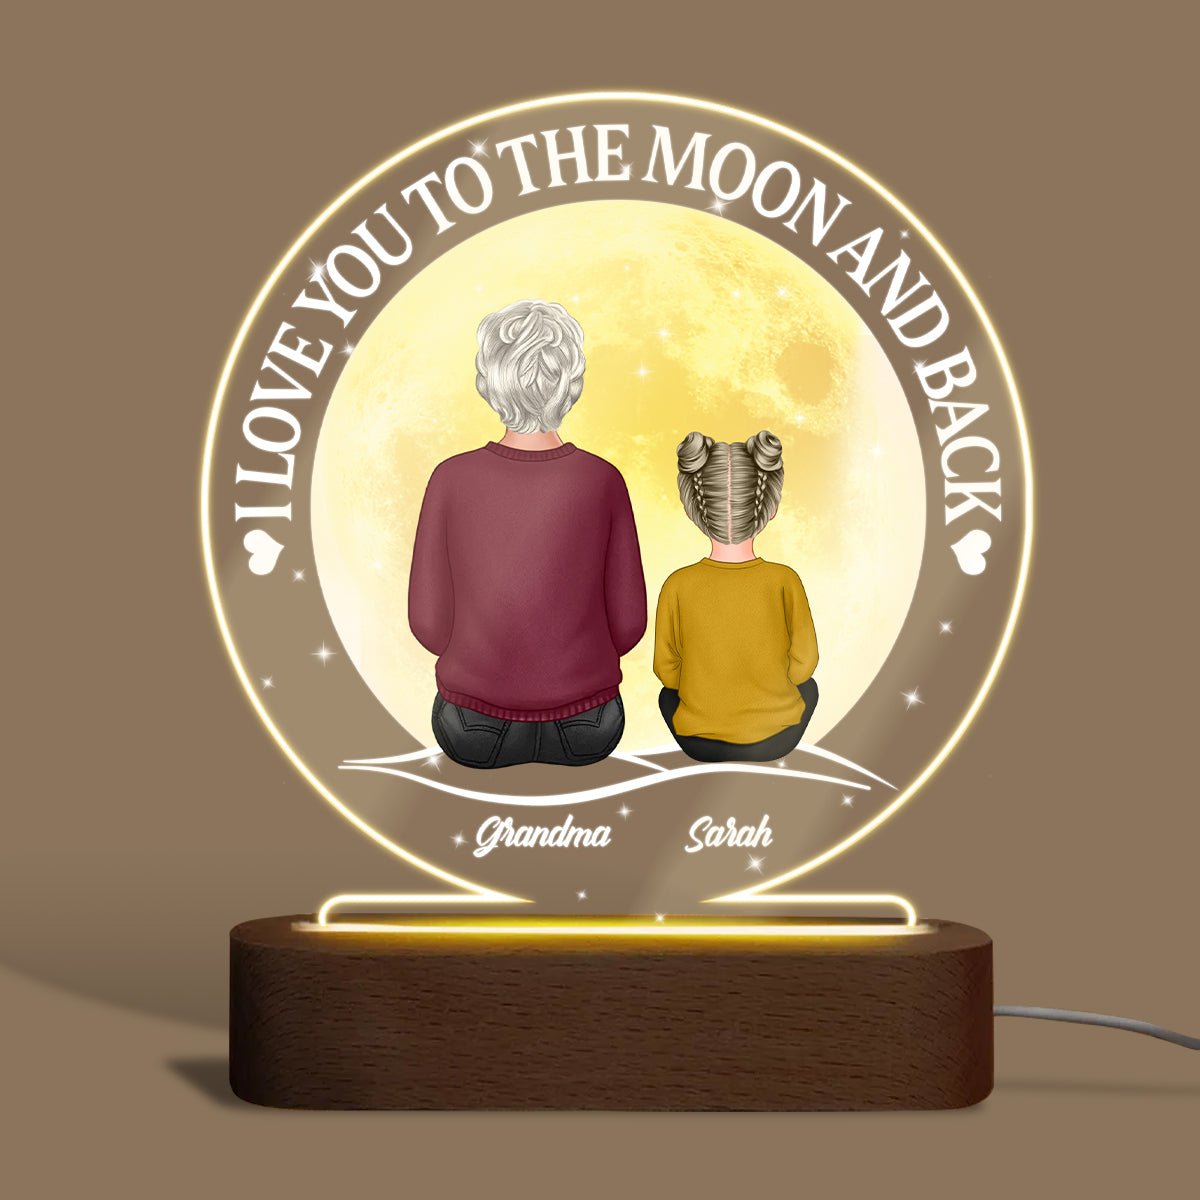 Grandma And Kid Sitting In Moon Night Love - Personalized Round Acrylic LED Lamp - Best Gift For Mother, Grandma - Giftago